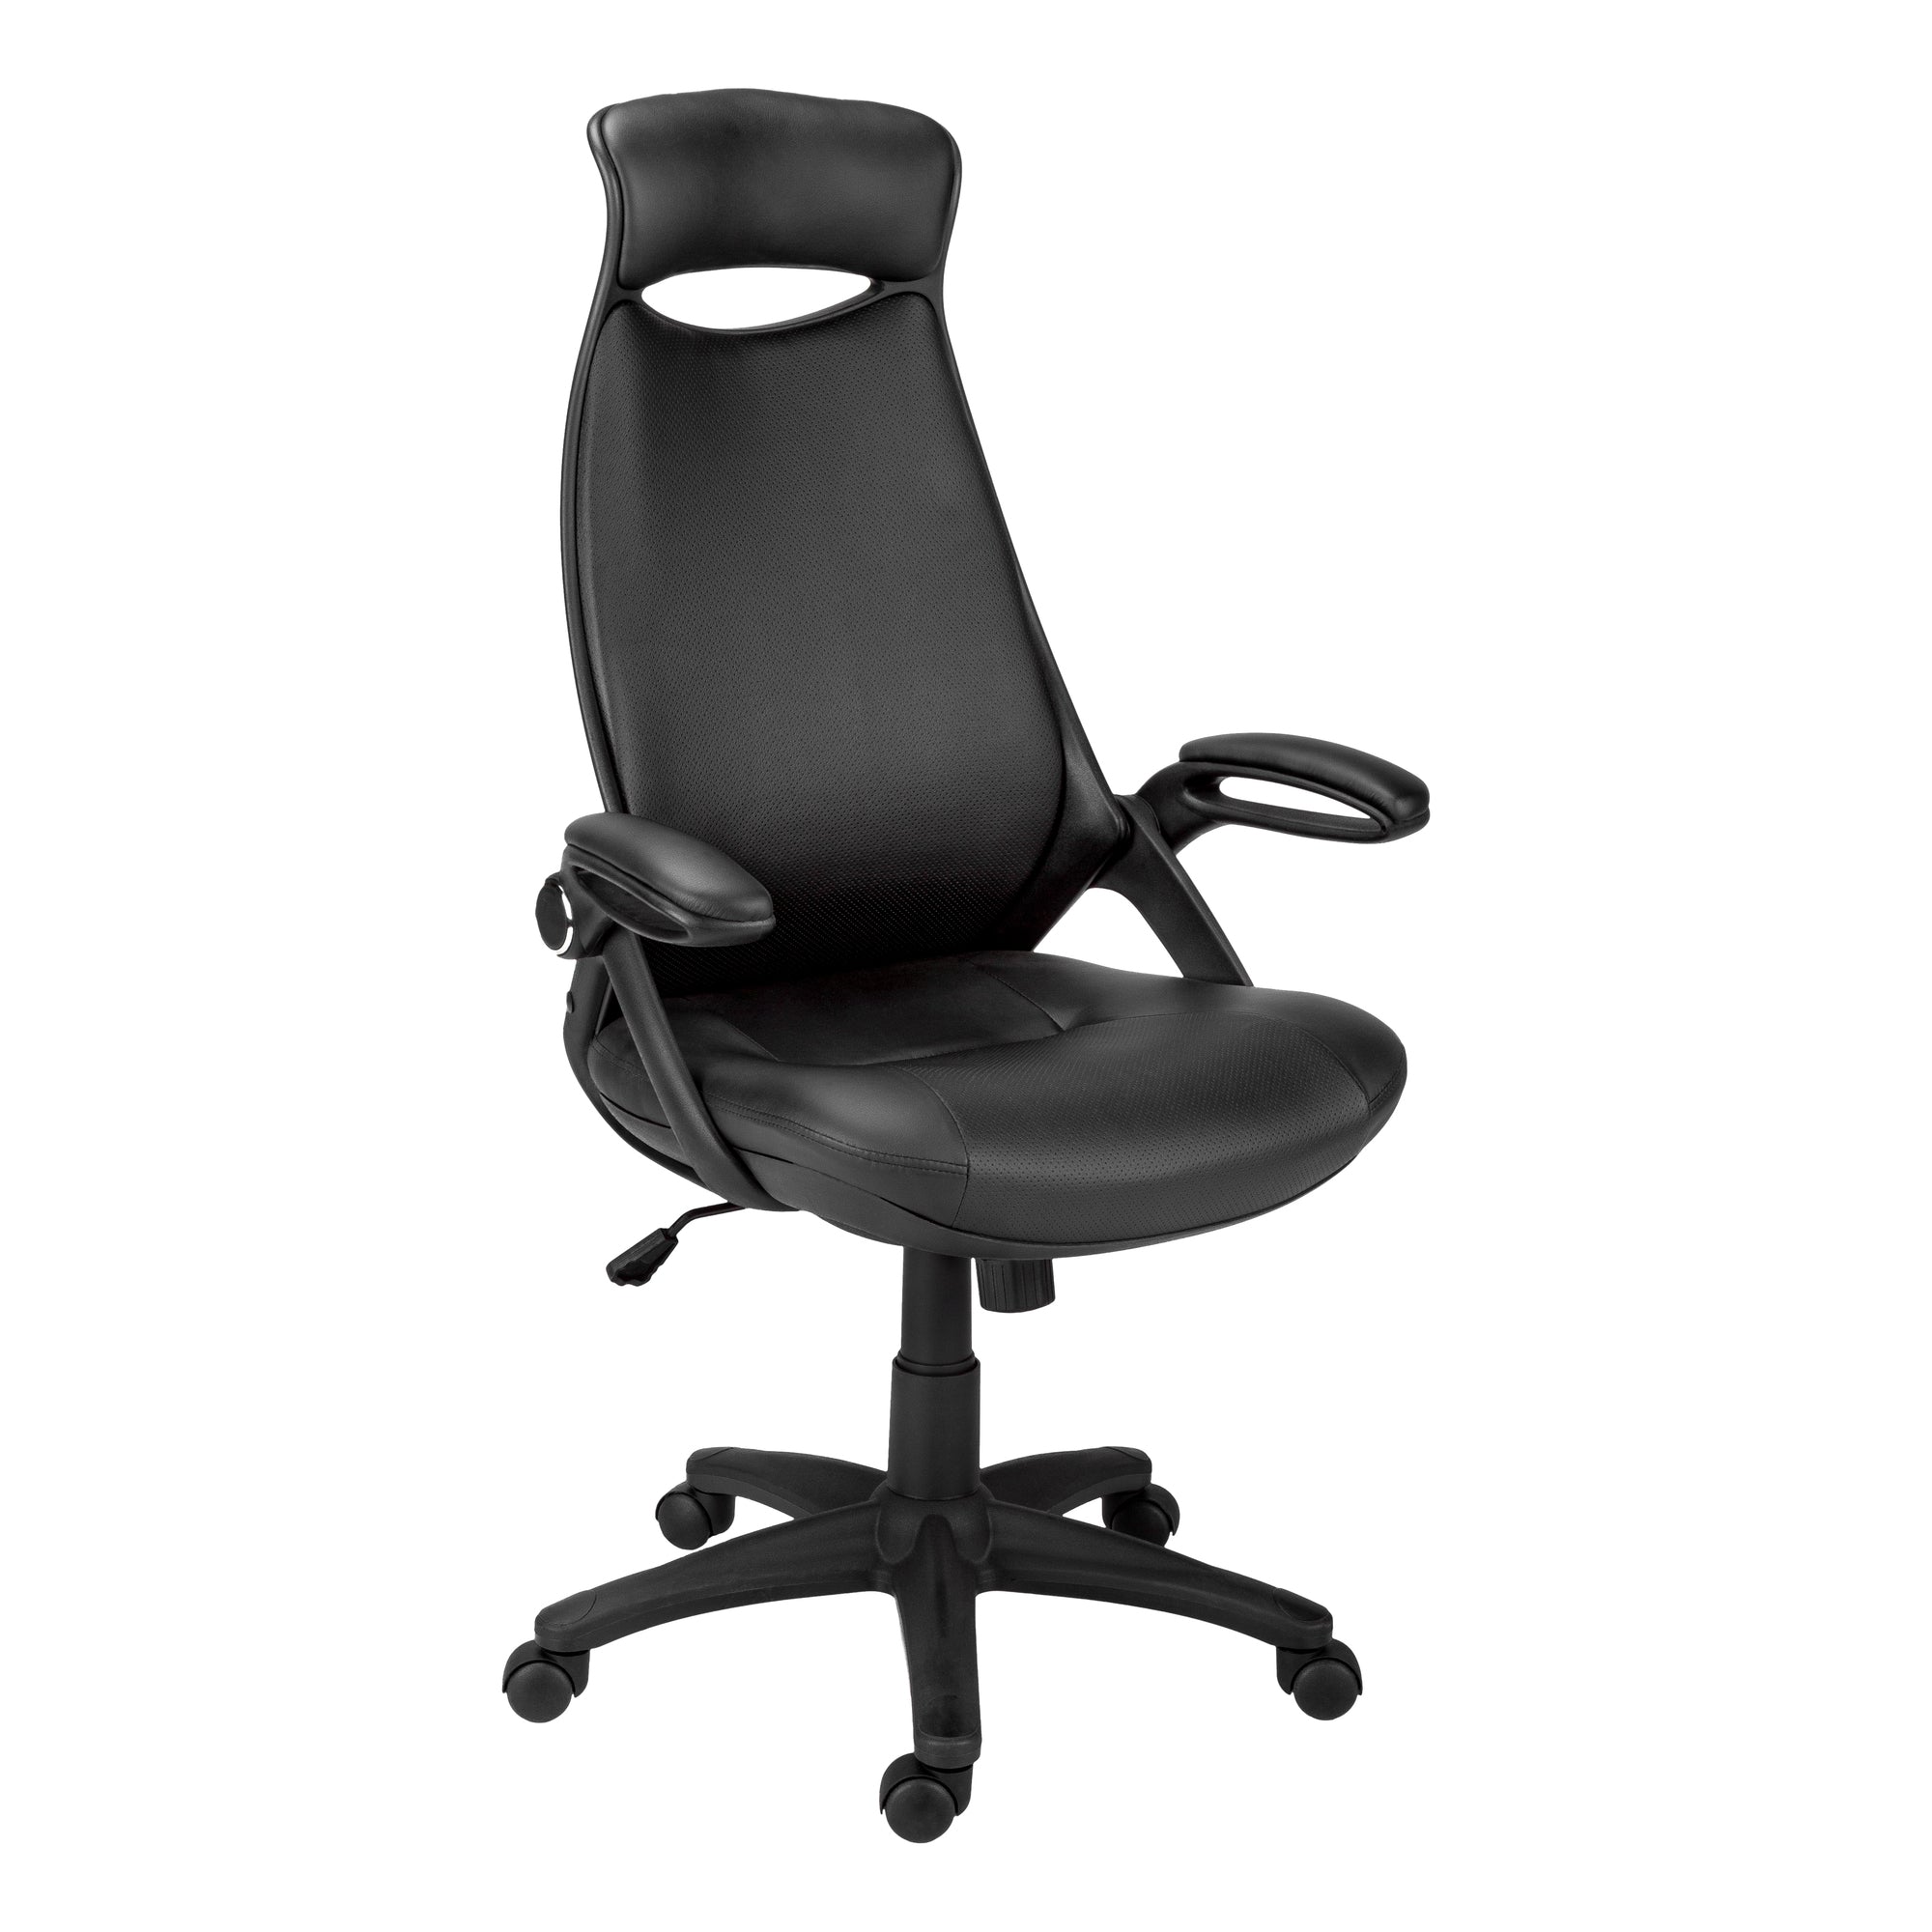 Office Chair - Black Leather-Look / Multi Position